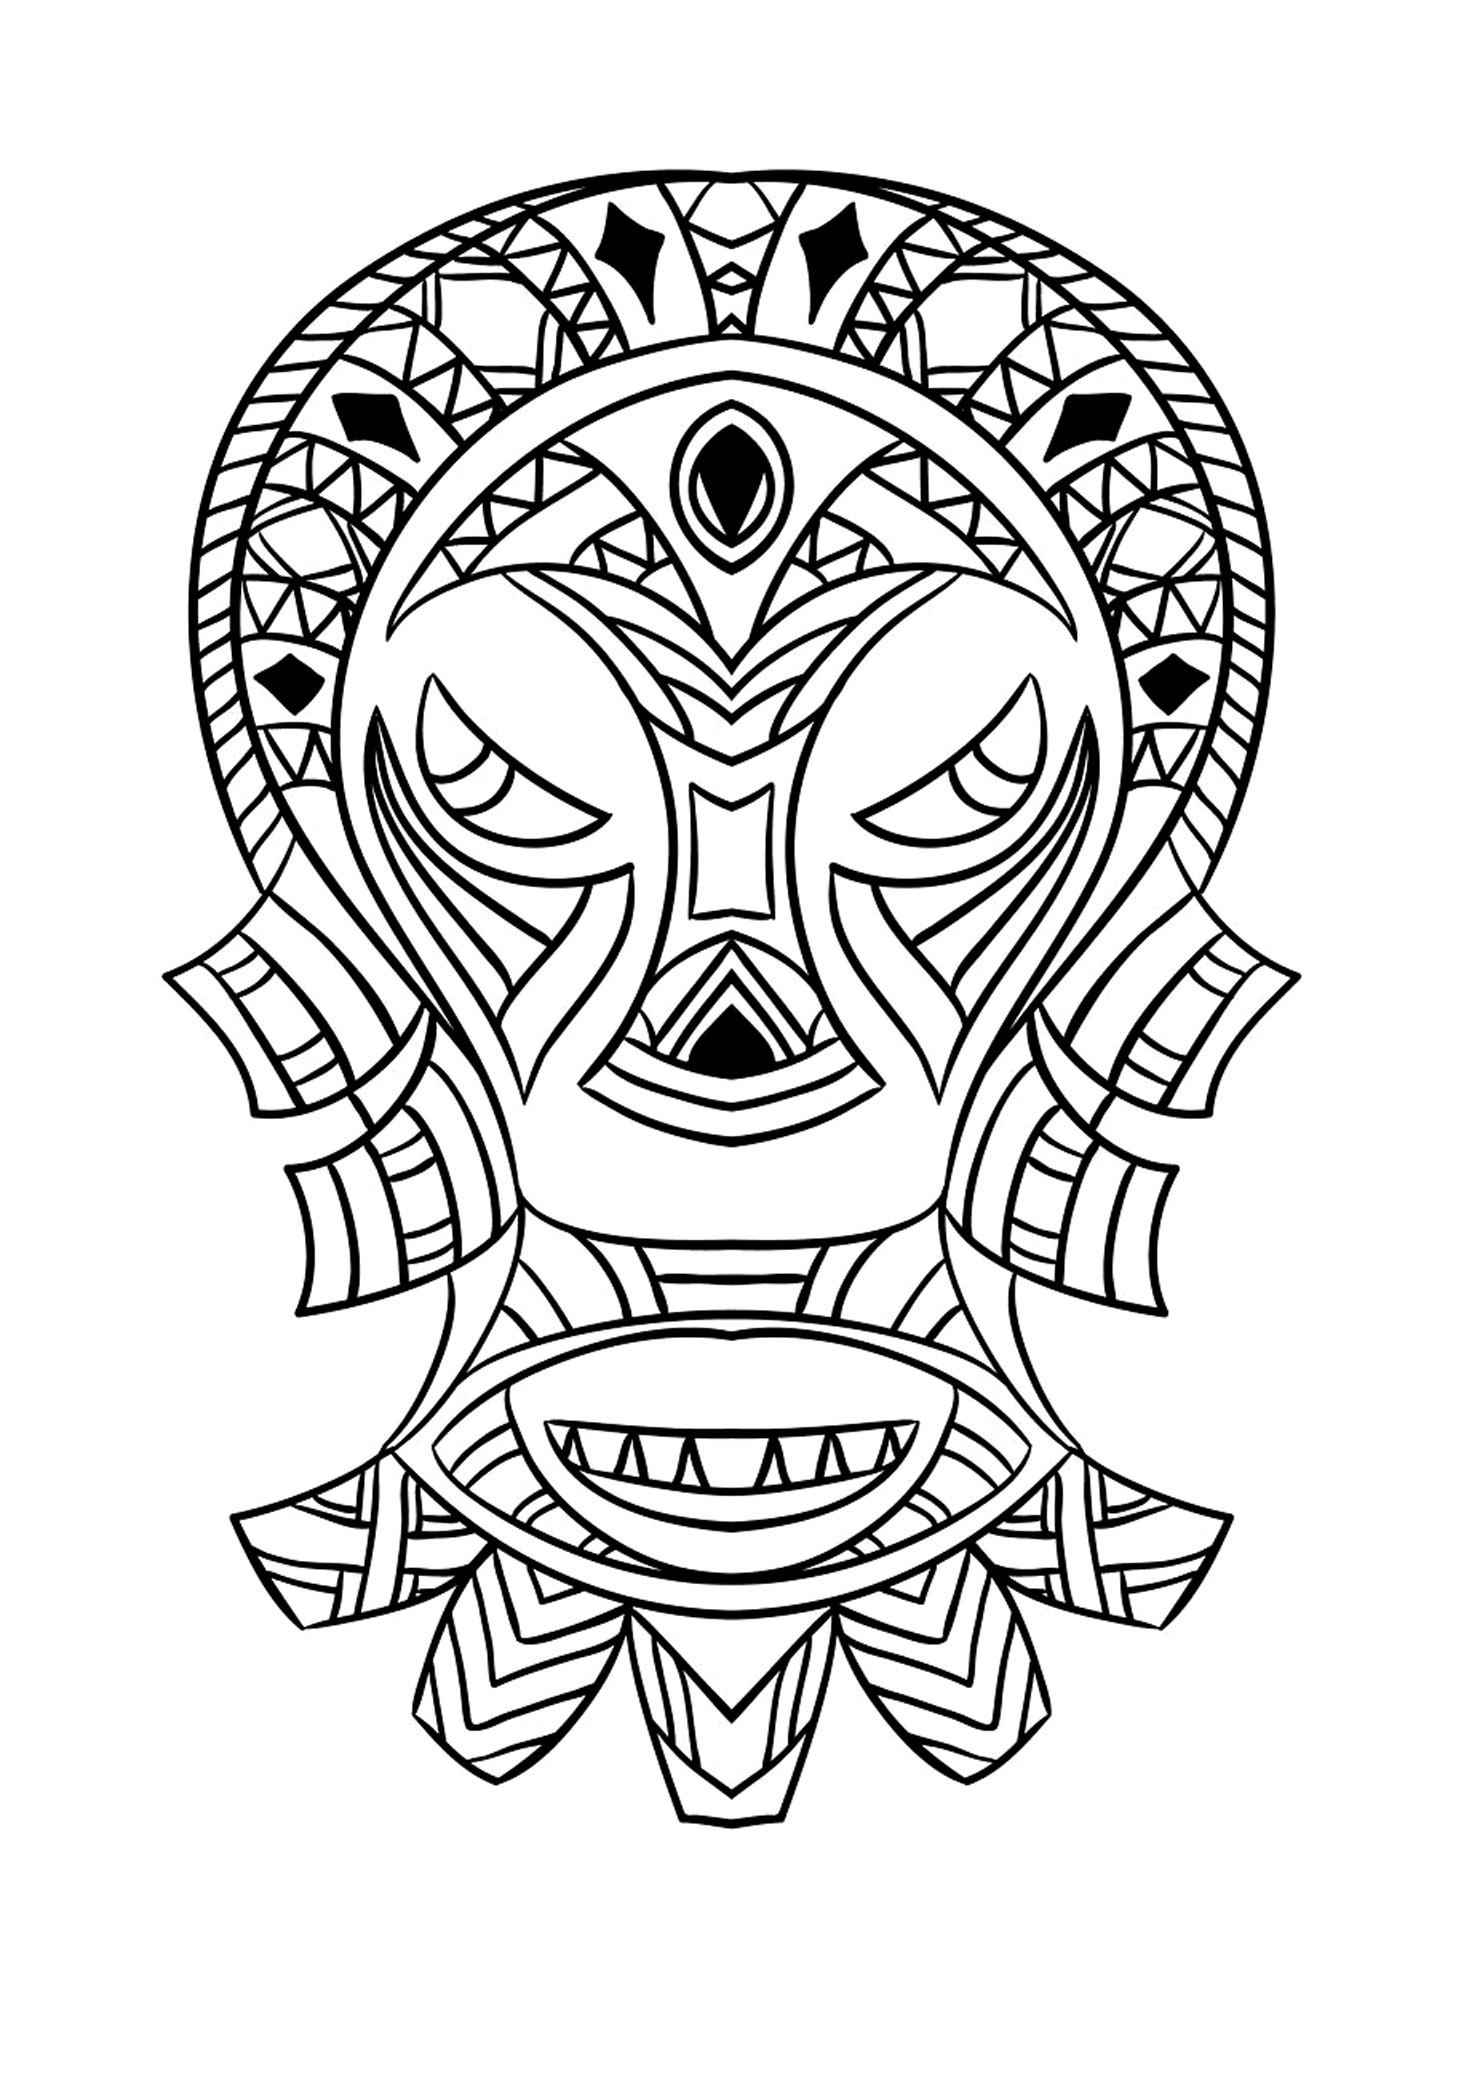 Coloring picture of an African mask - 4